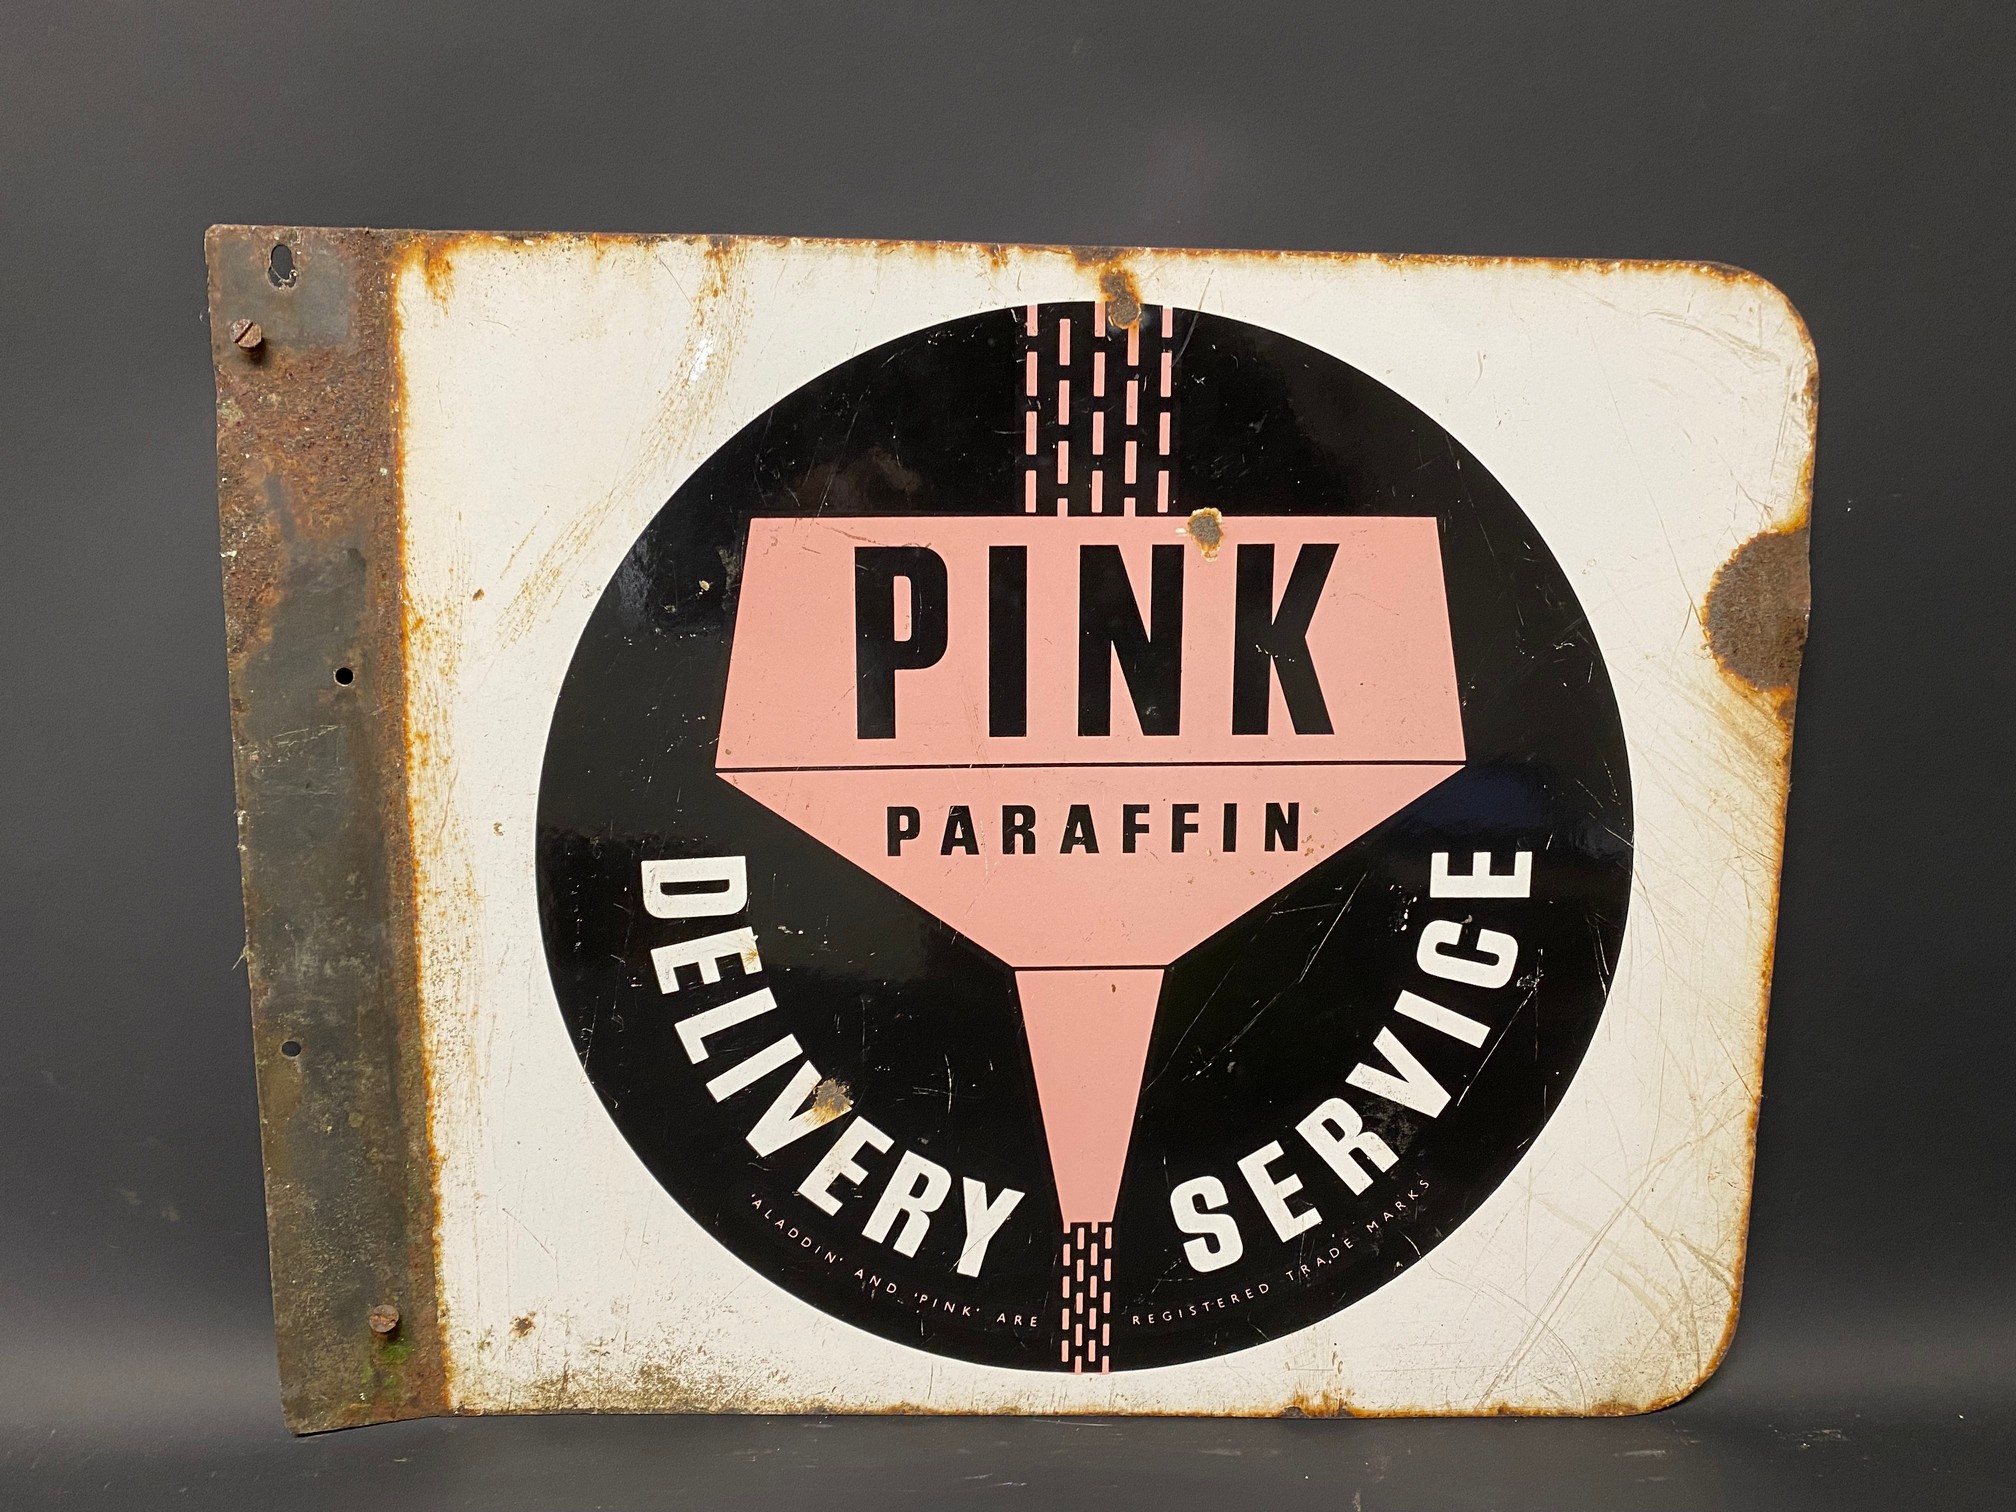 A Pink Paraffin Delivery Service double sided enamel sign with flattened hanging flange, 21 x 16 1/